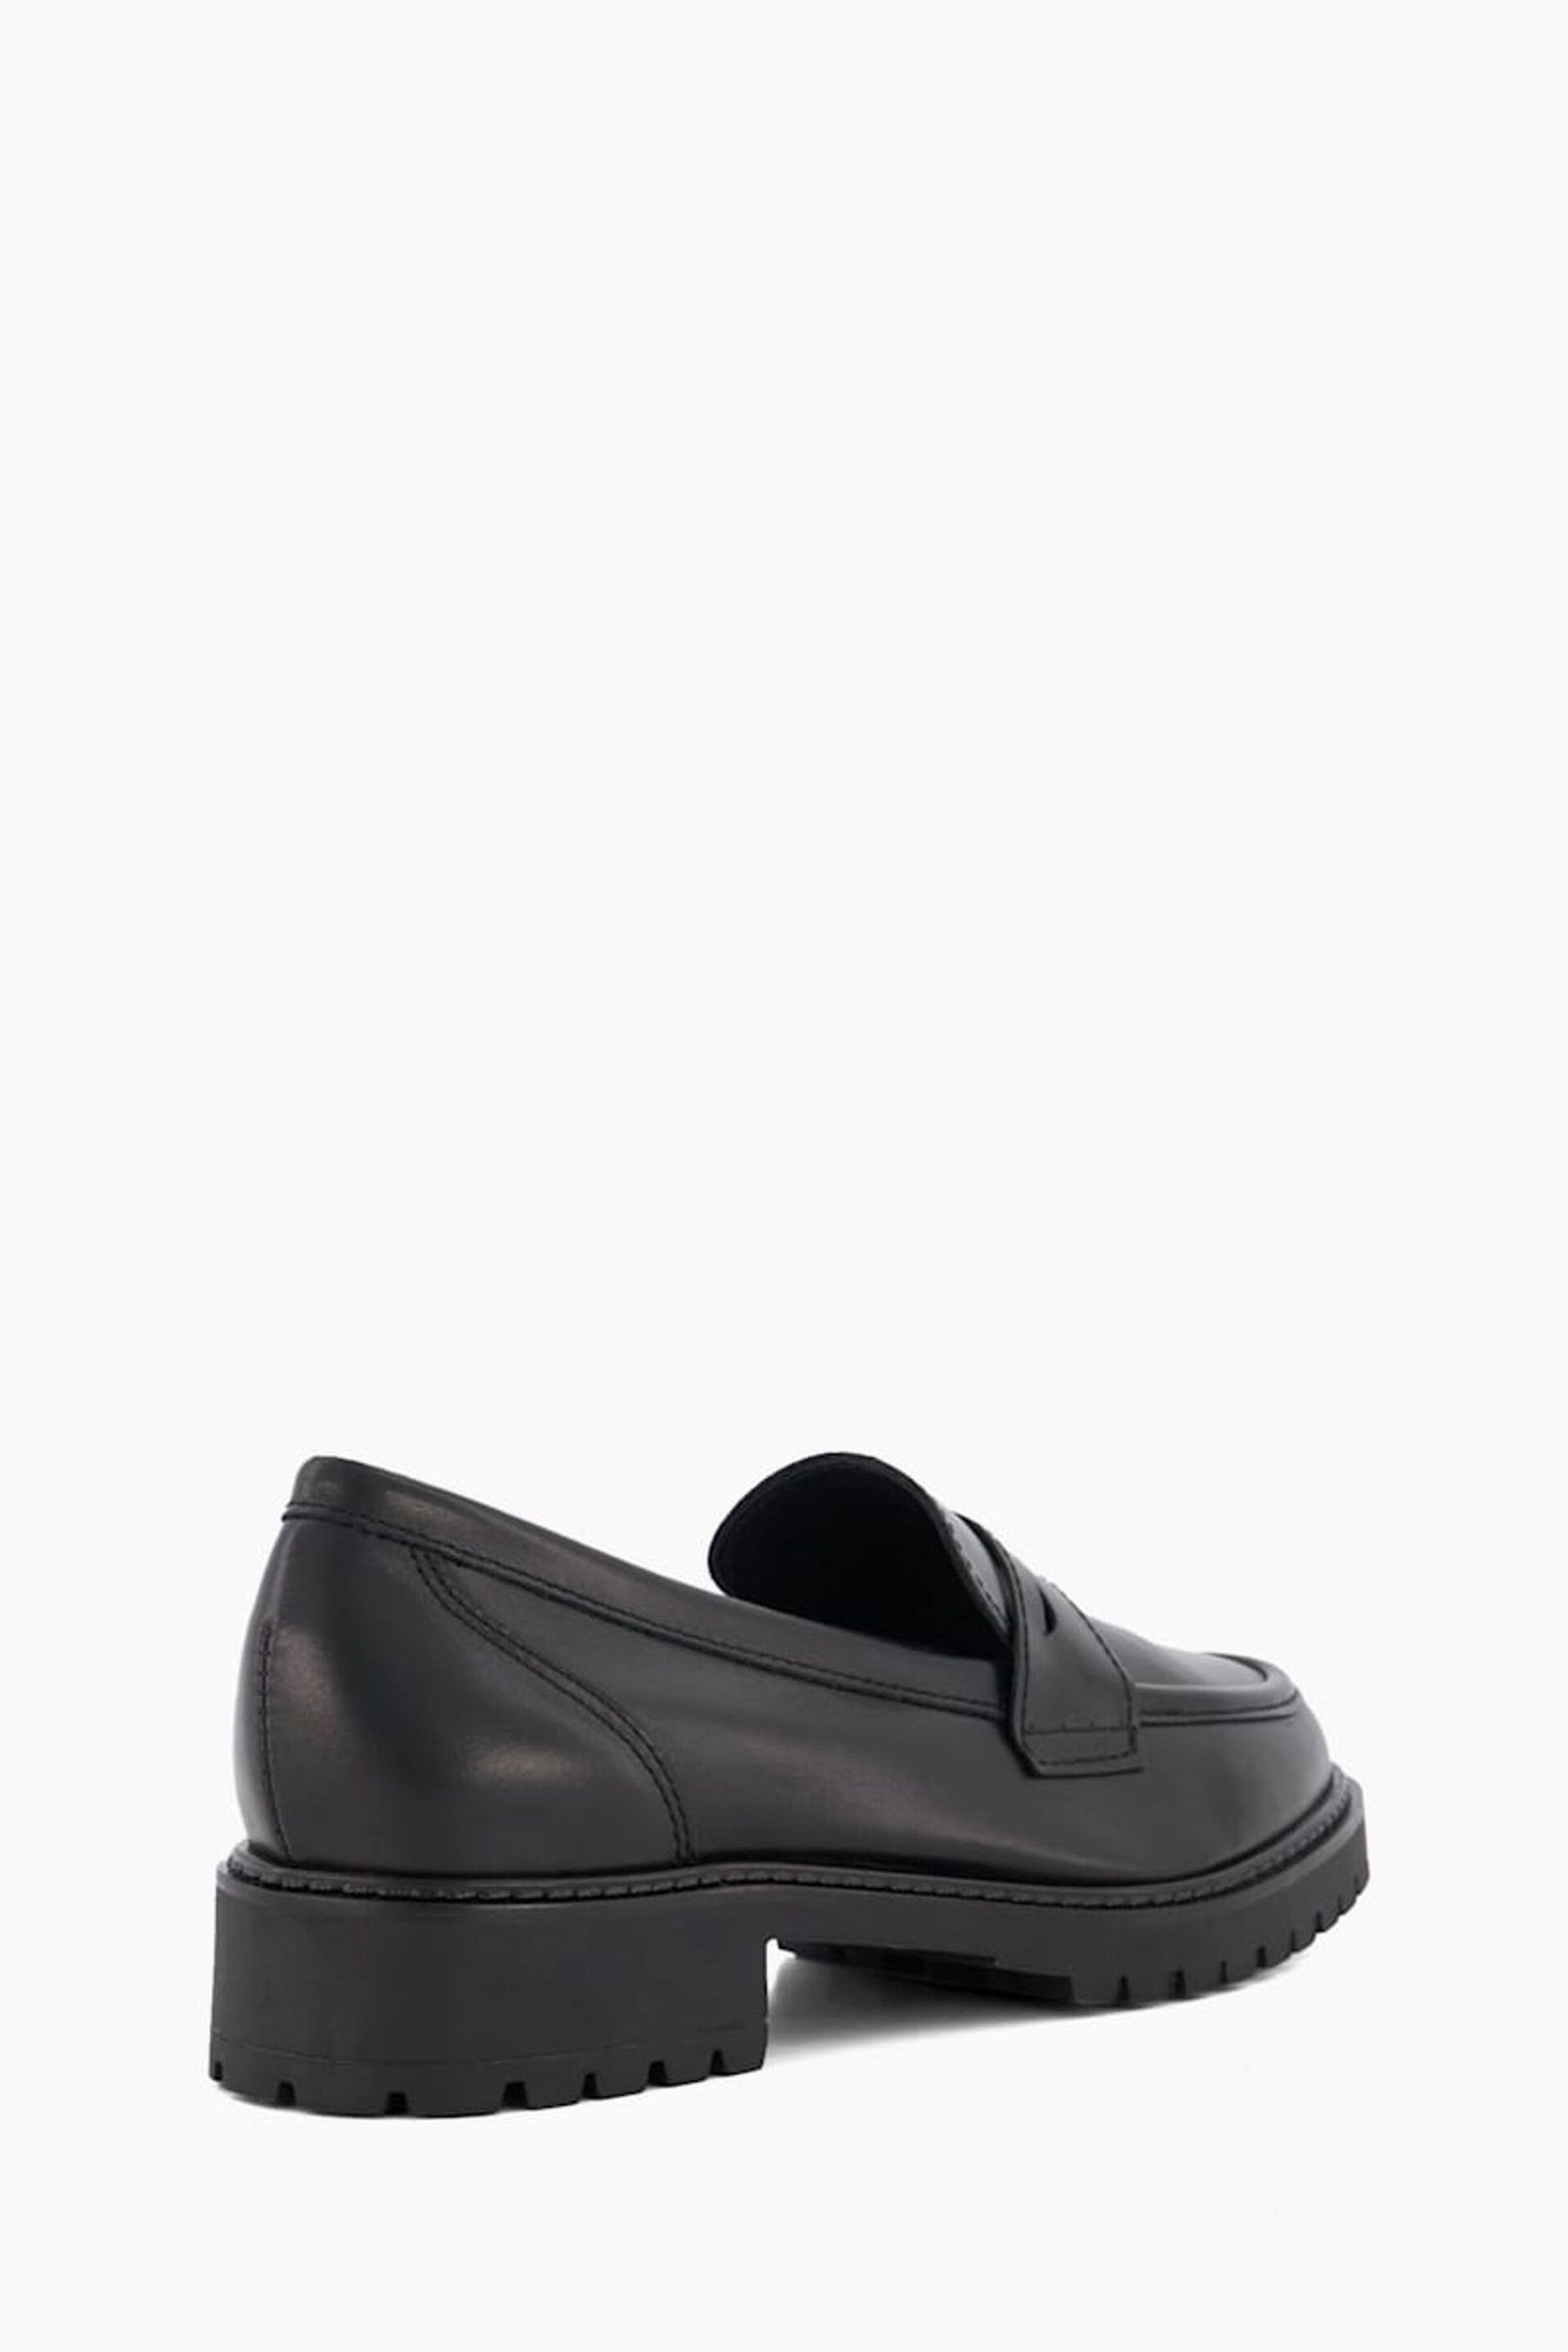 Dune London Black Gild Cleated Penny Loafers - Image 3 of 6